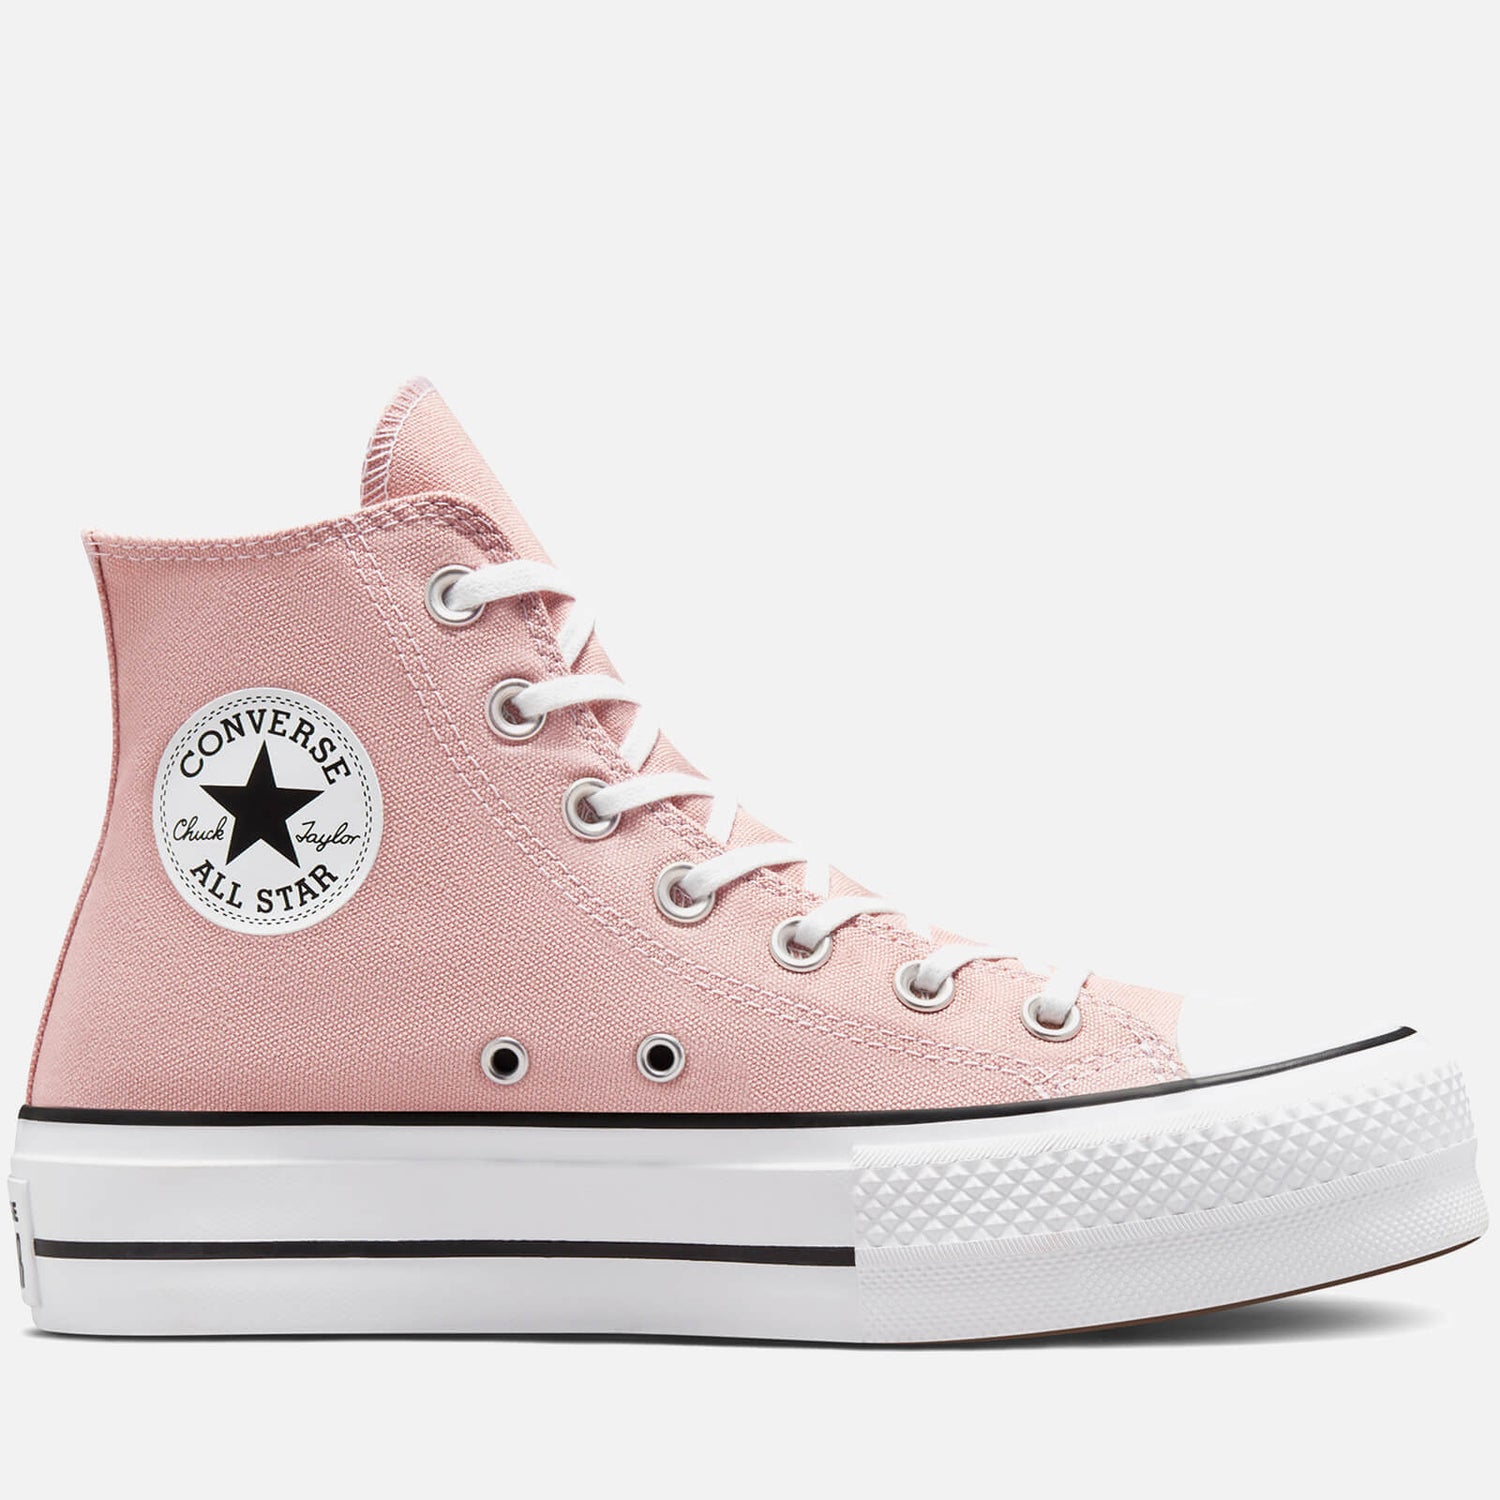 Converse Women's Chuck Taylor All Star Lift Hi-Top Trainers - Pink Clay/Black White - UK 3